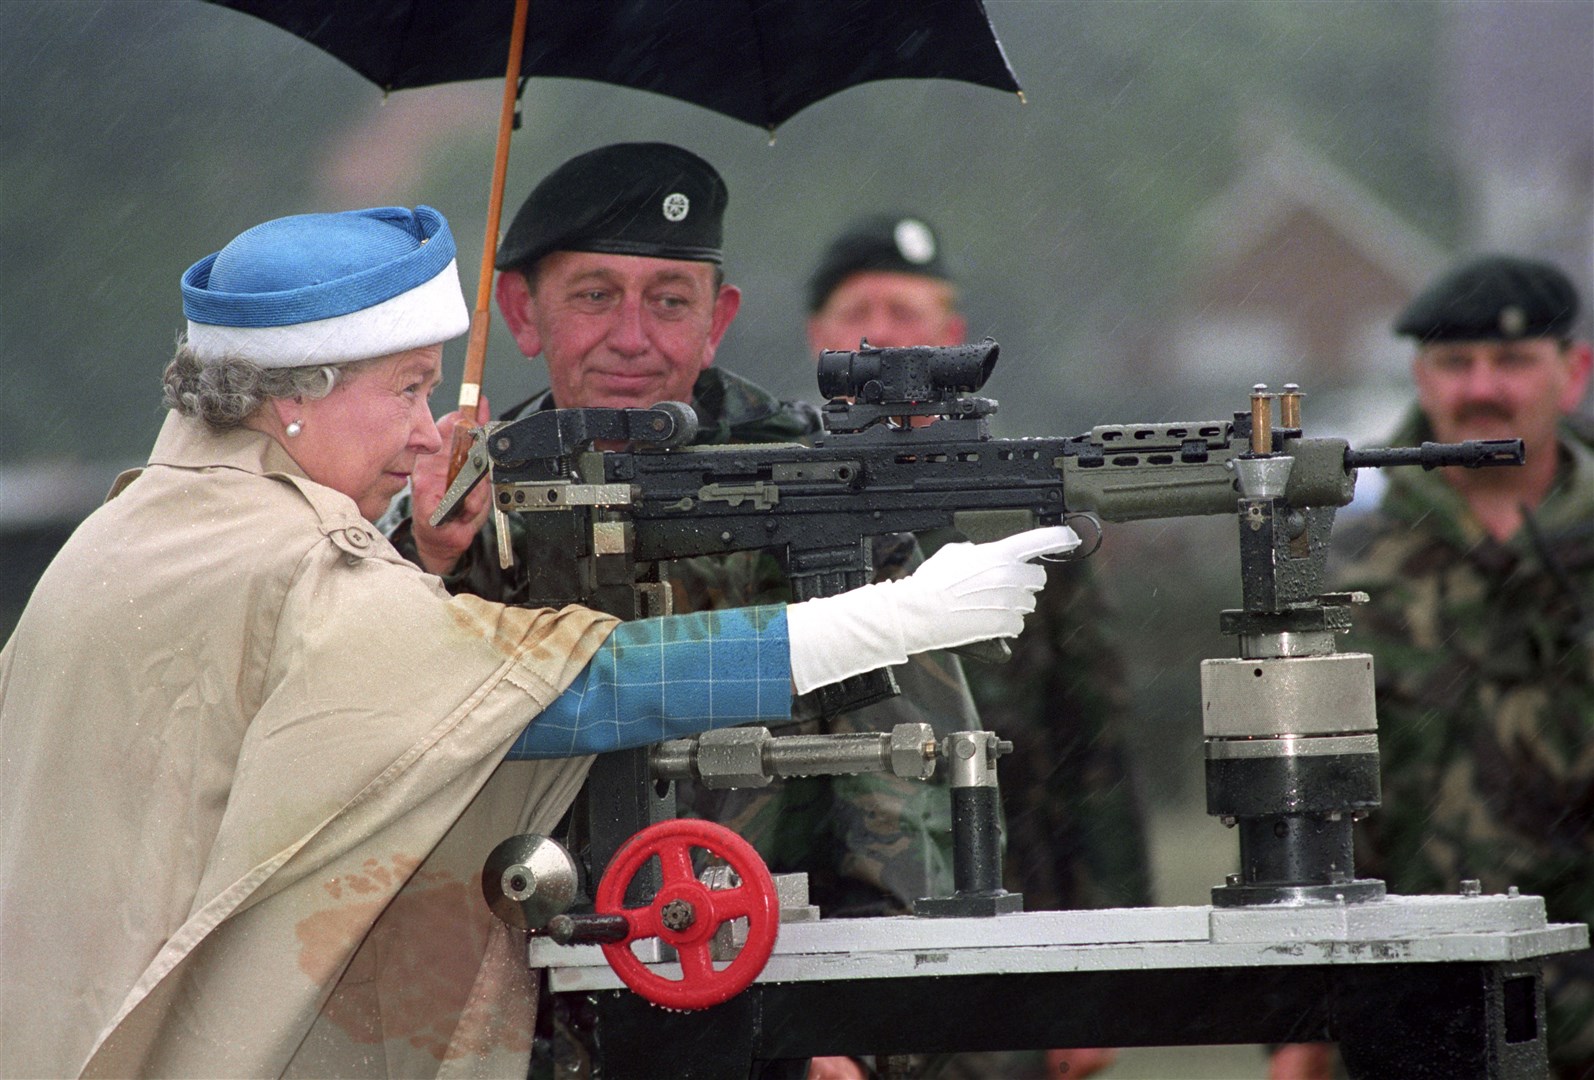 The Queen fires the last shot on a rifle at Bisley ranges (Tim Ockenden/PA)